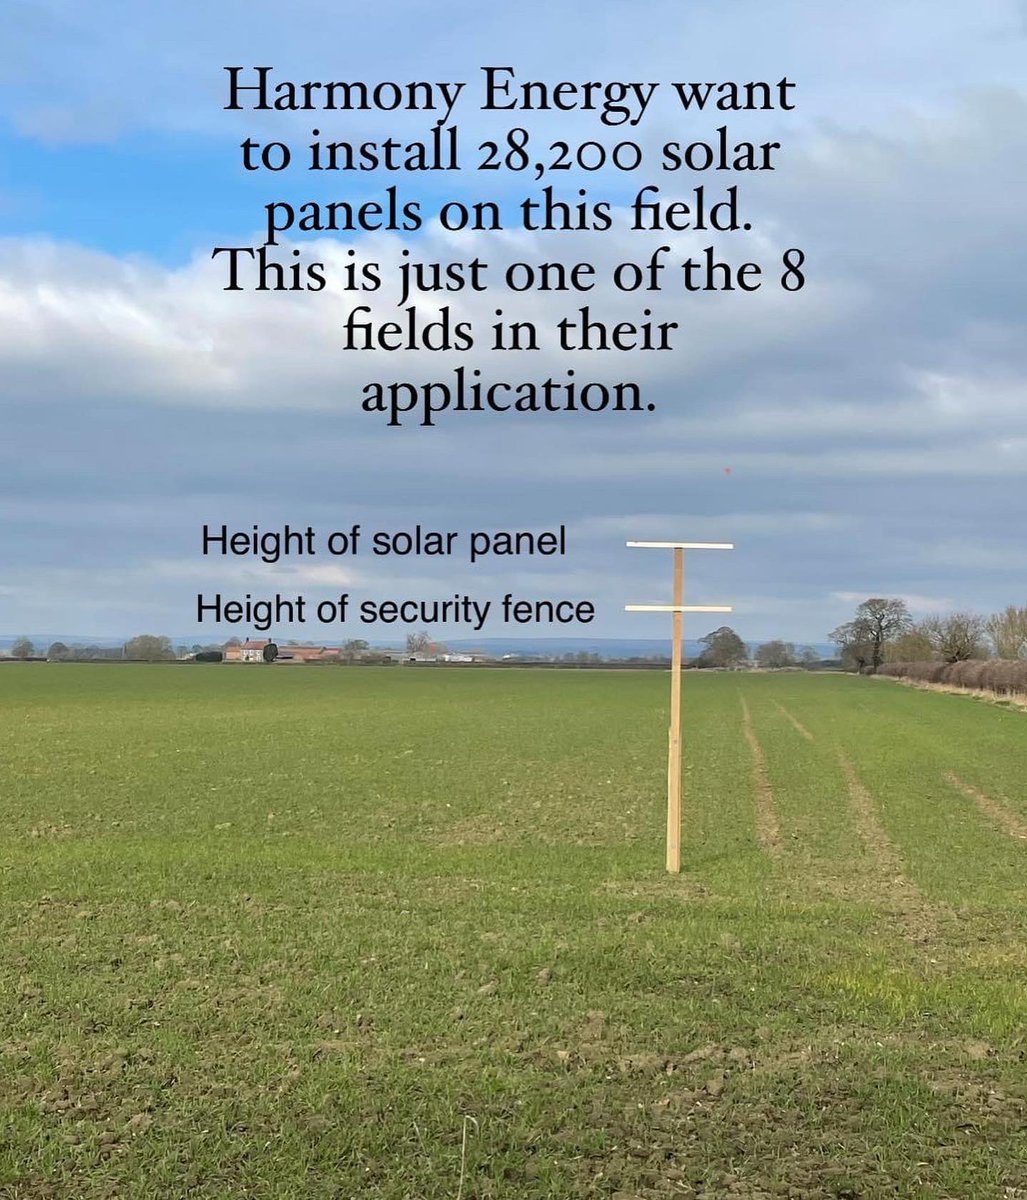 Say NO to solar on best and most versatile farmland in #oldmalton and say NO to Harmony Energy. #northyorkshiremoors #landscape #valeofpickering #farming @tenantfarmers @CPRE_NEY @northyorksc 
Object here planningregister.ryedale.gov.uk/caonline-appli…